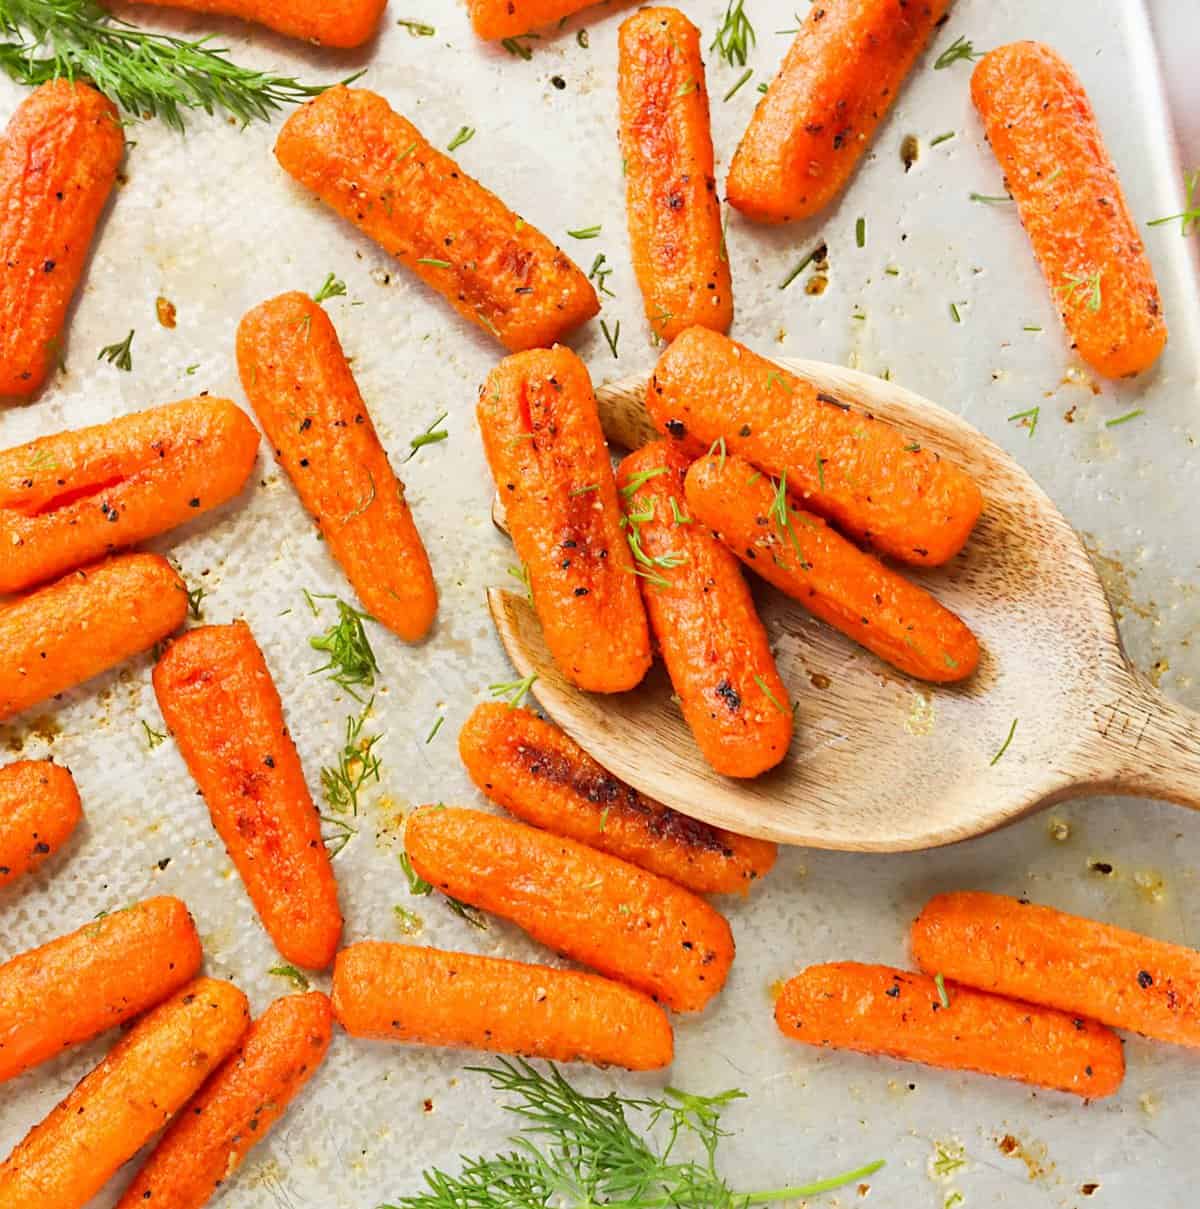 Serving up savory Roasted Baby Carrots with a wooden spoon for a soul-satisfying side